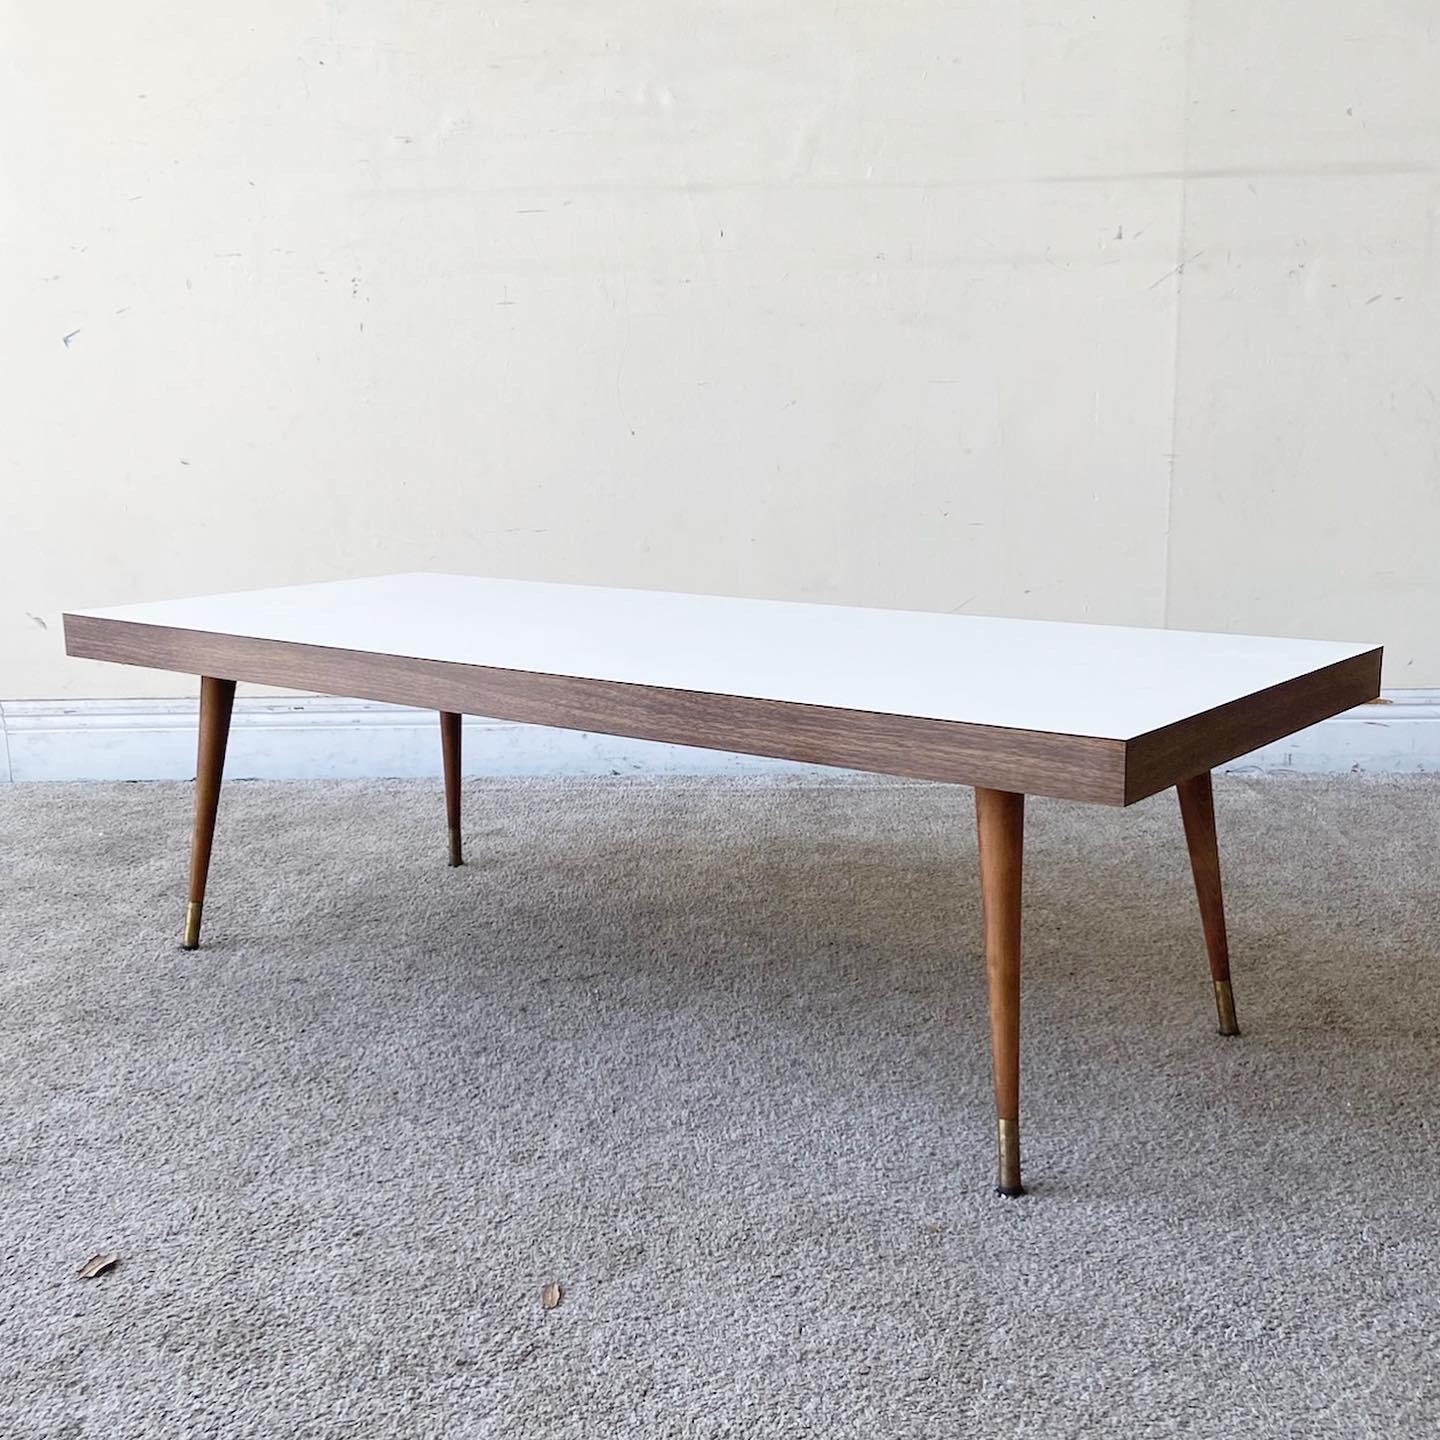 Exceptional Mid-Century Modern coffee table. Features a wooden frame with a white laminate top.
 